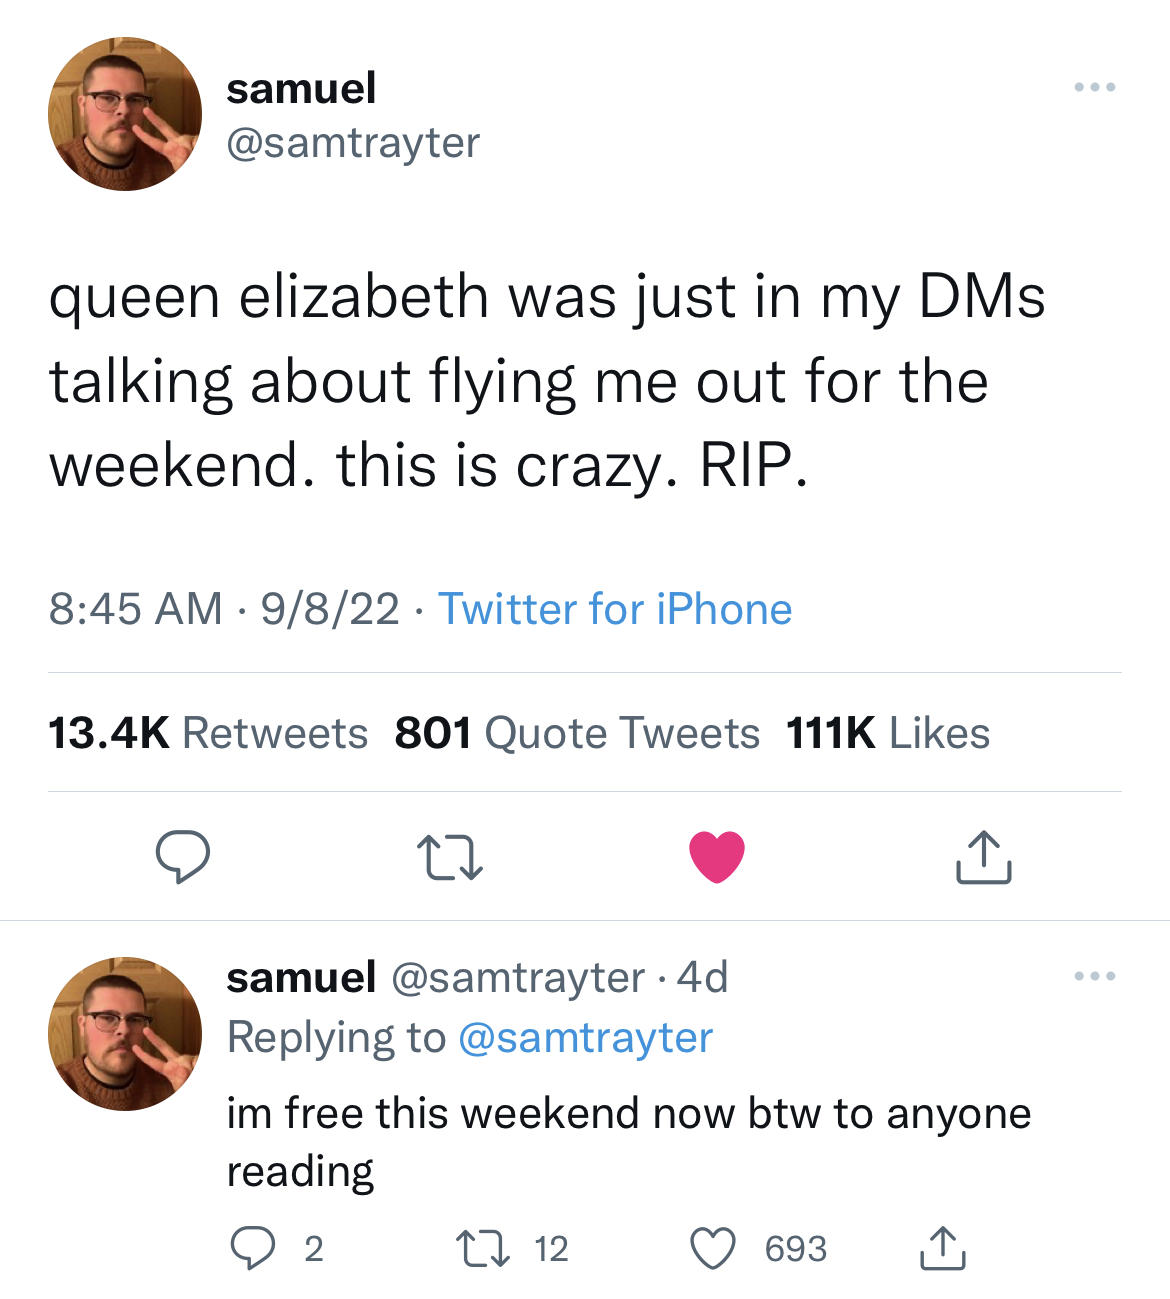 Queen Elizabeth II Death Reactions - nut video meme - samuel queen elizabeth was just in my DMs talking about flying me out for the weekend. this is crazy. Rip. 9822 Twitter for iPhone 801 Quote Tweets 27 samuel 4d im free this weekend now btw to anyone r